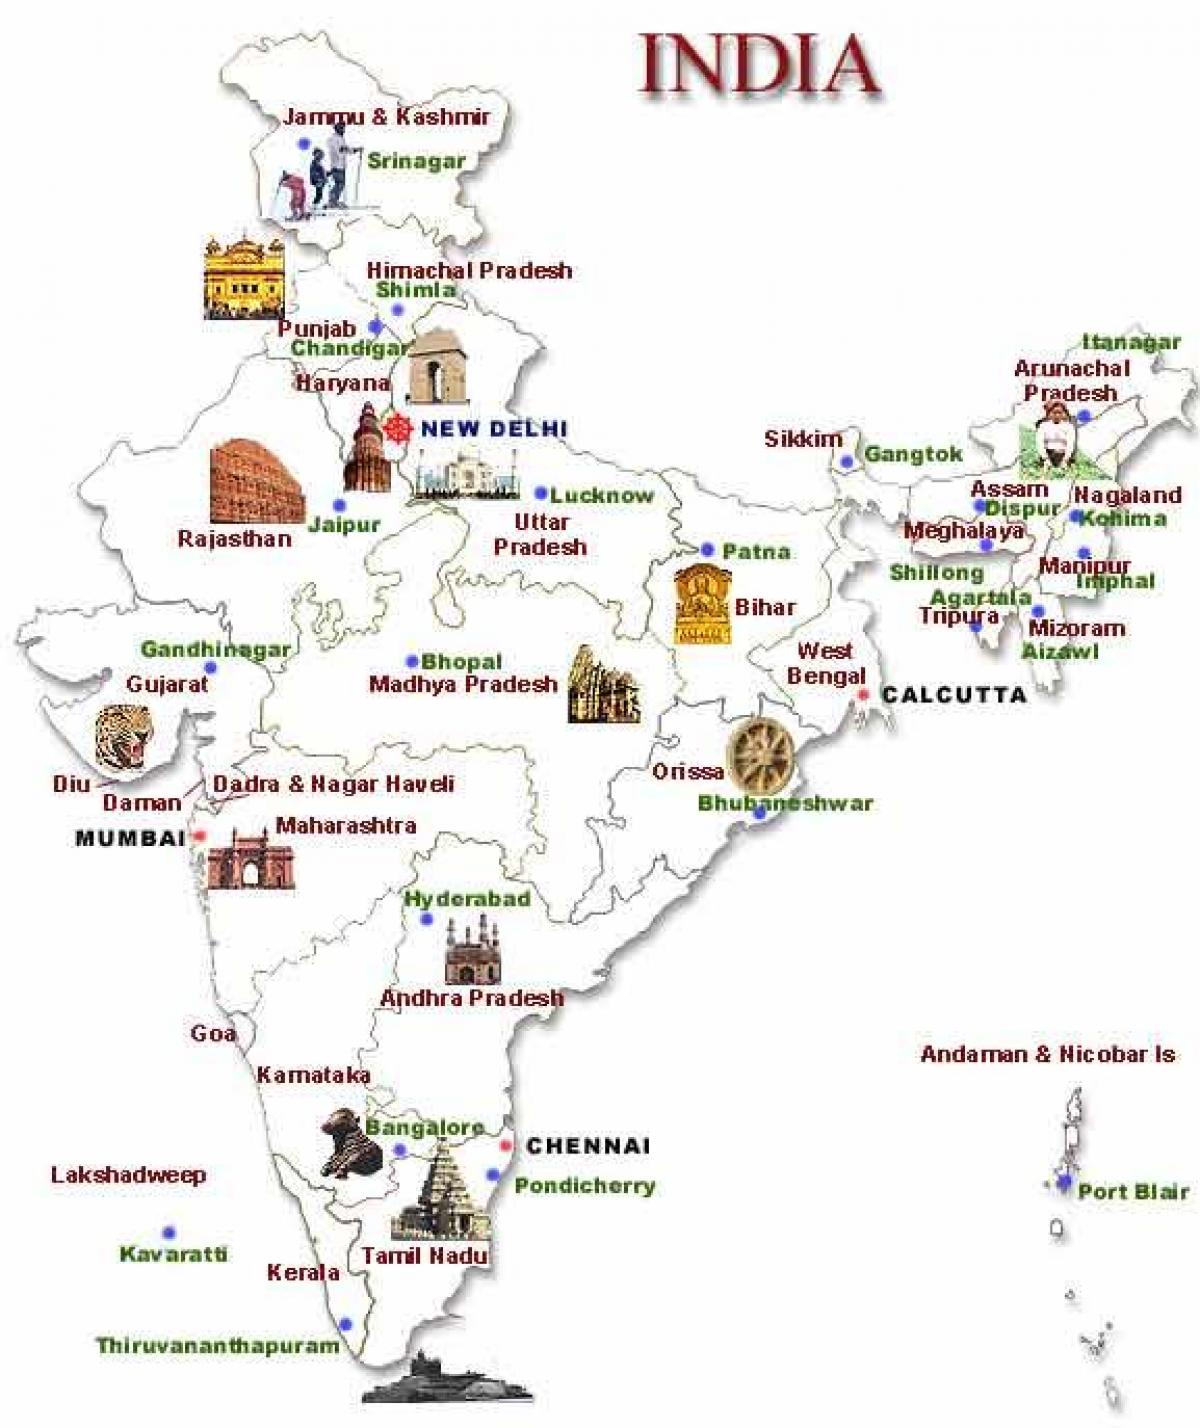 which state has most tourist places in india